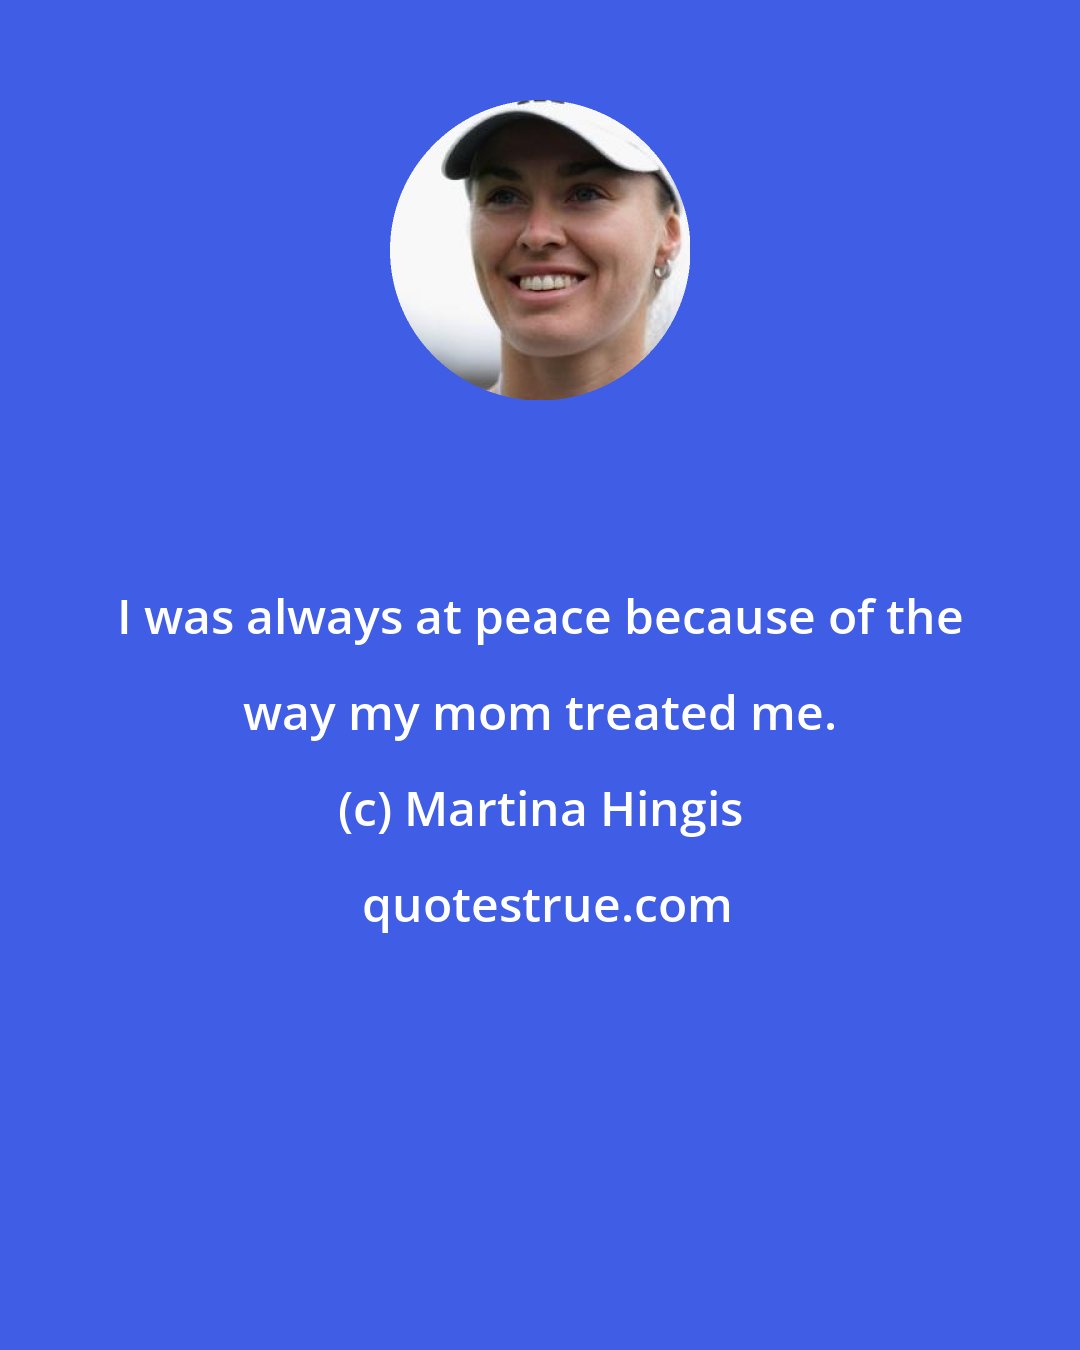 Martina Hingis: I was always at peace because of the way my mom treated me.